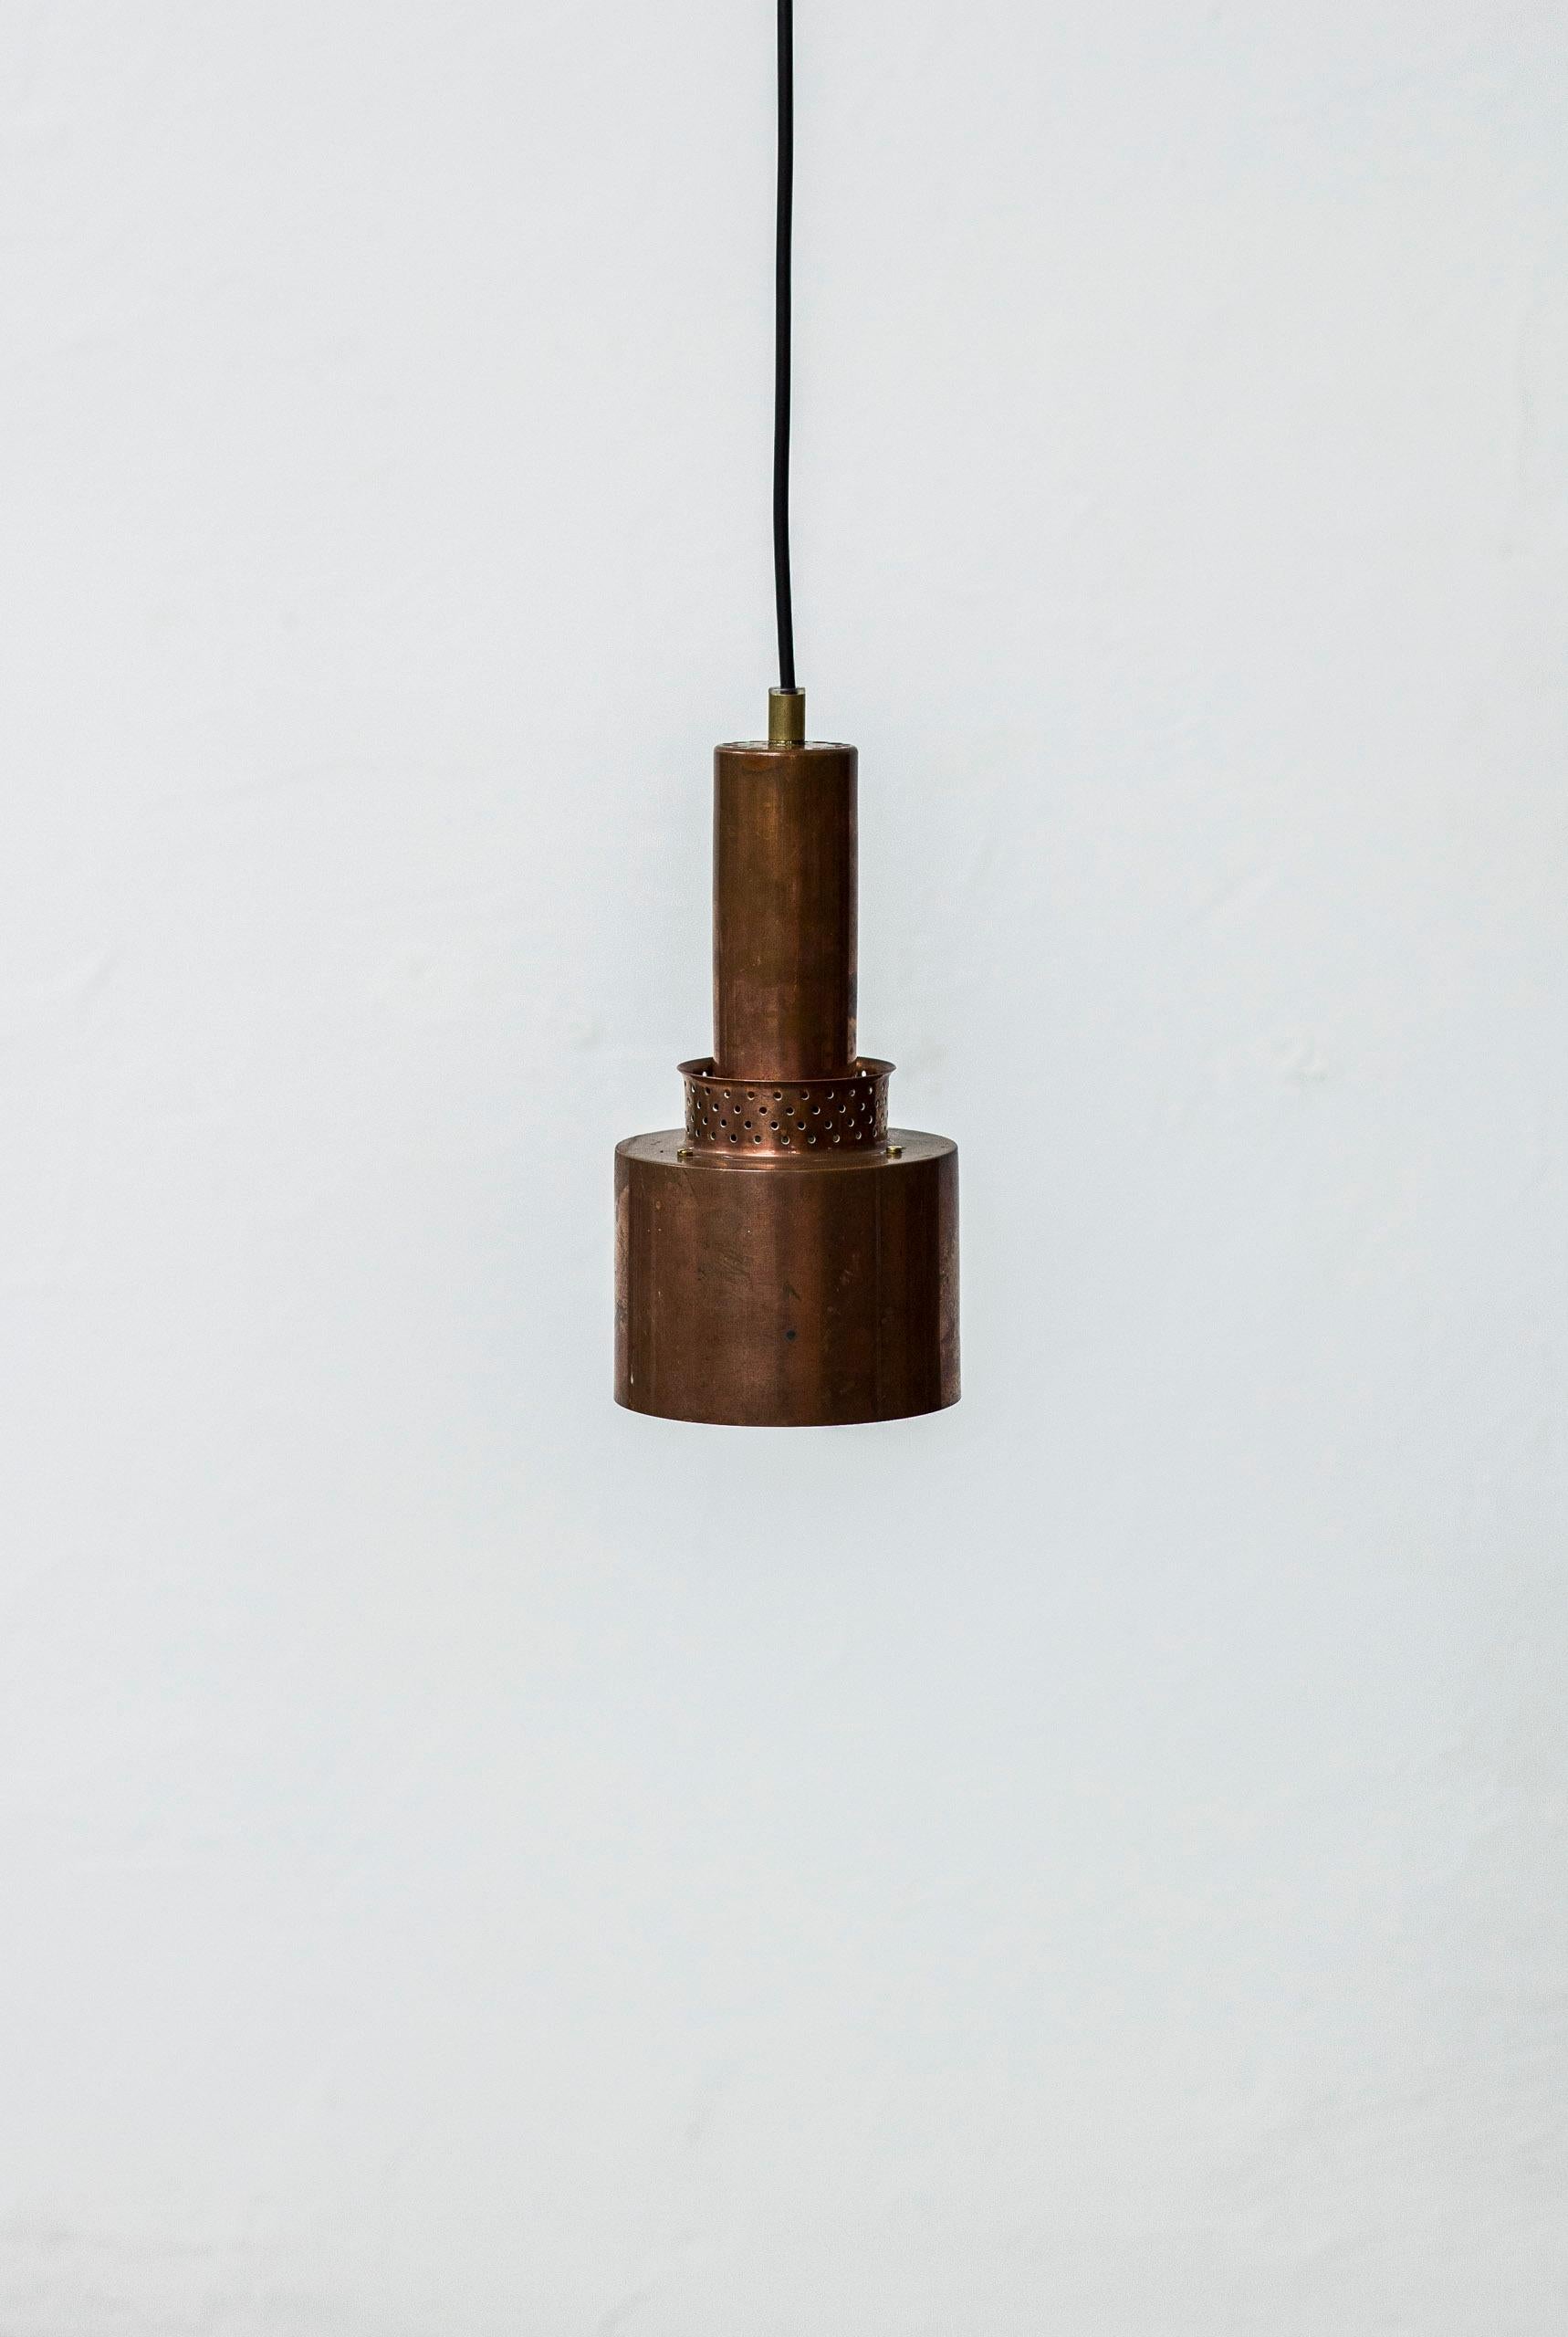 Pendant lamps designed by Hans Agne Jakobsson. produced by his own company in Sweden during the 1950s. Made from solid copper with original patina. Brass screws and details. All three with original ceiling mount in copper. New electric components.